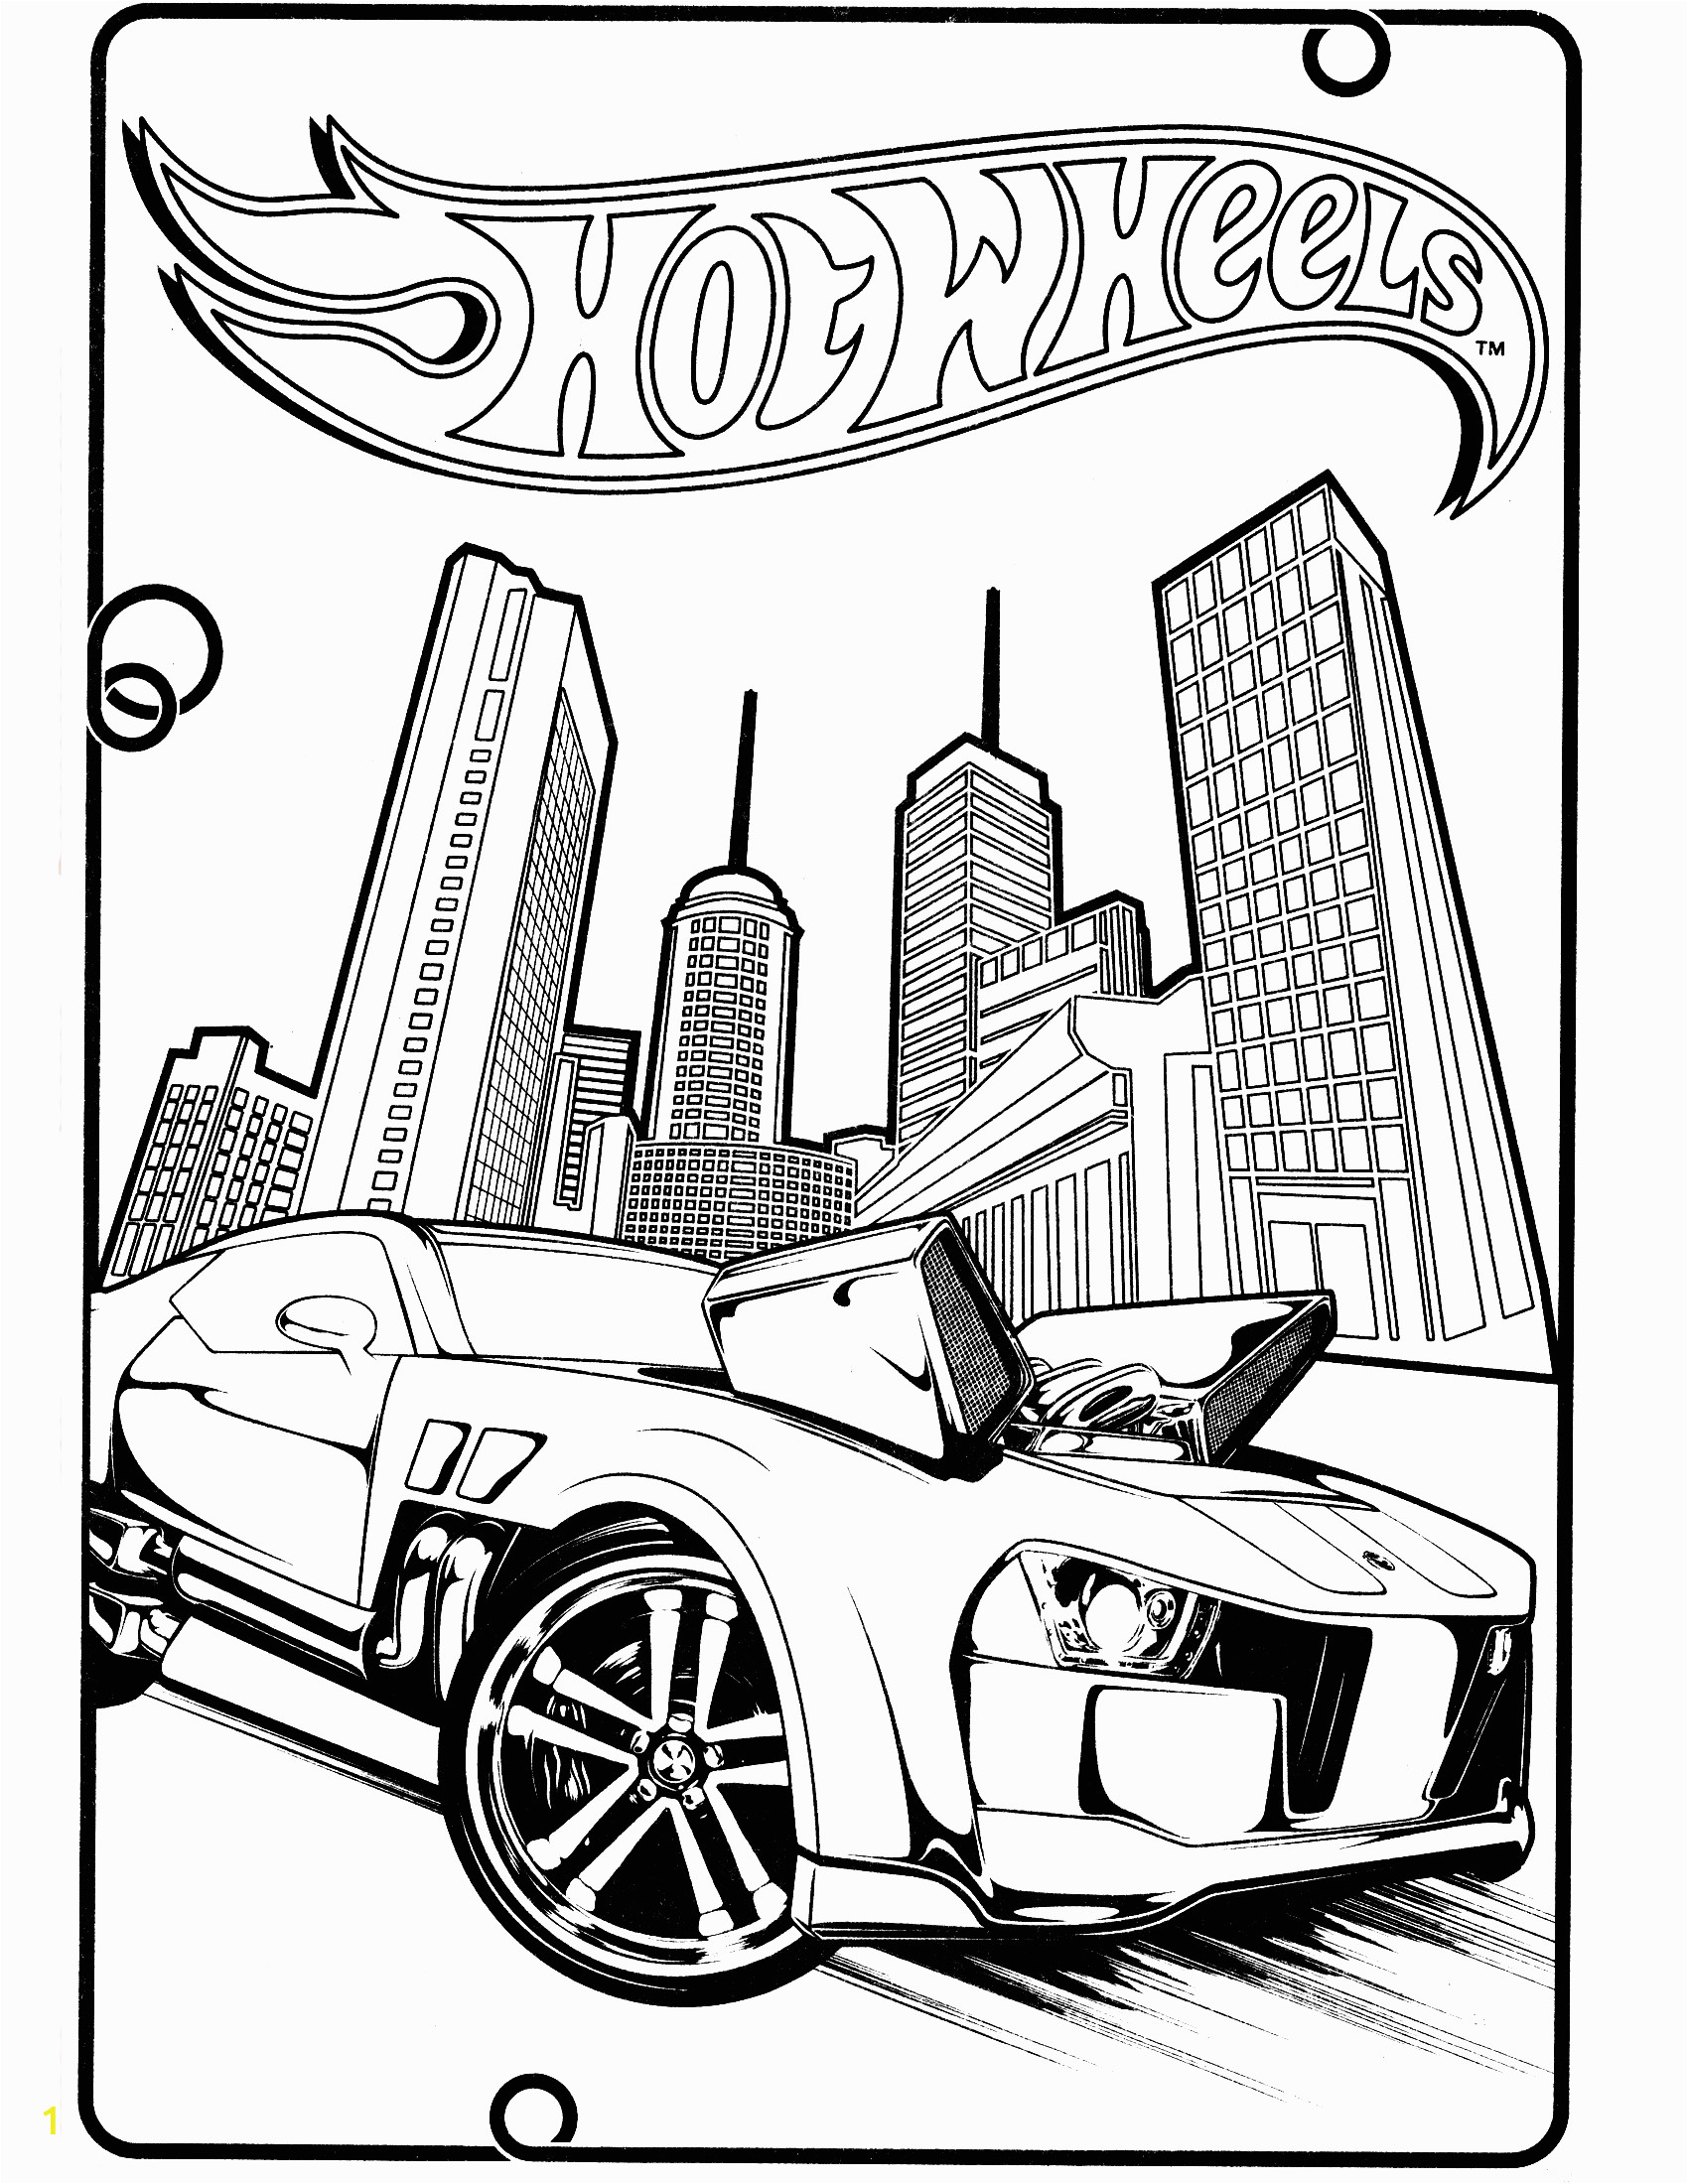 Hot Wheels Free Printable Coloring Pages Free Printable Hot Wheels Coloring Pages for Kids